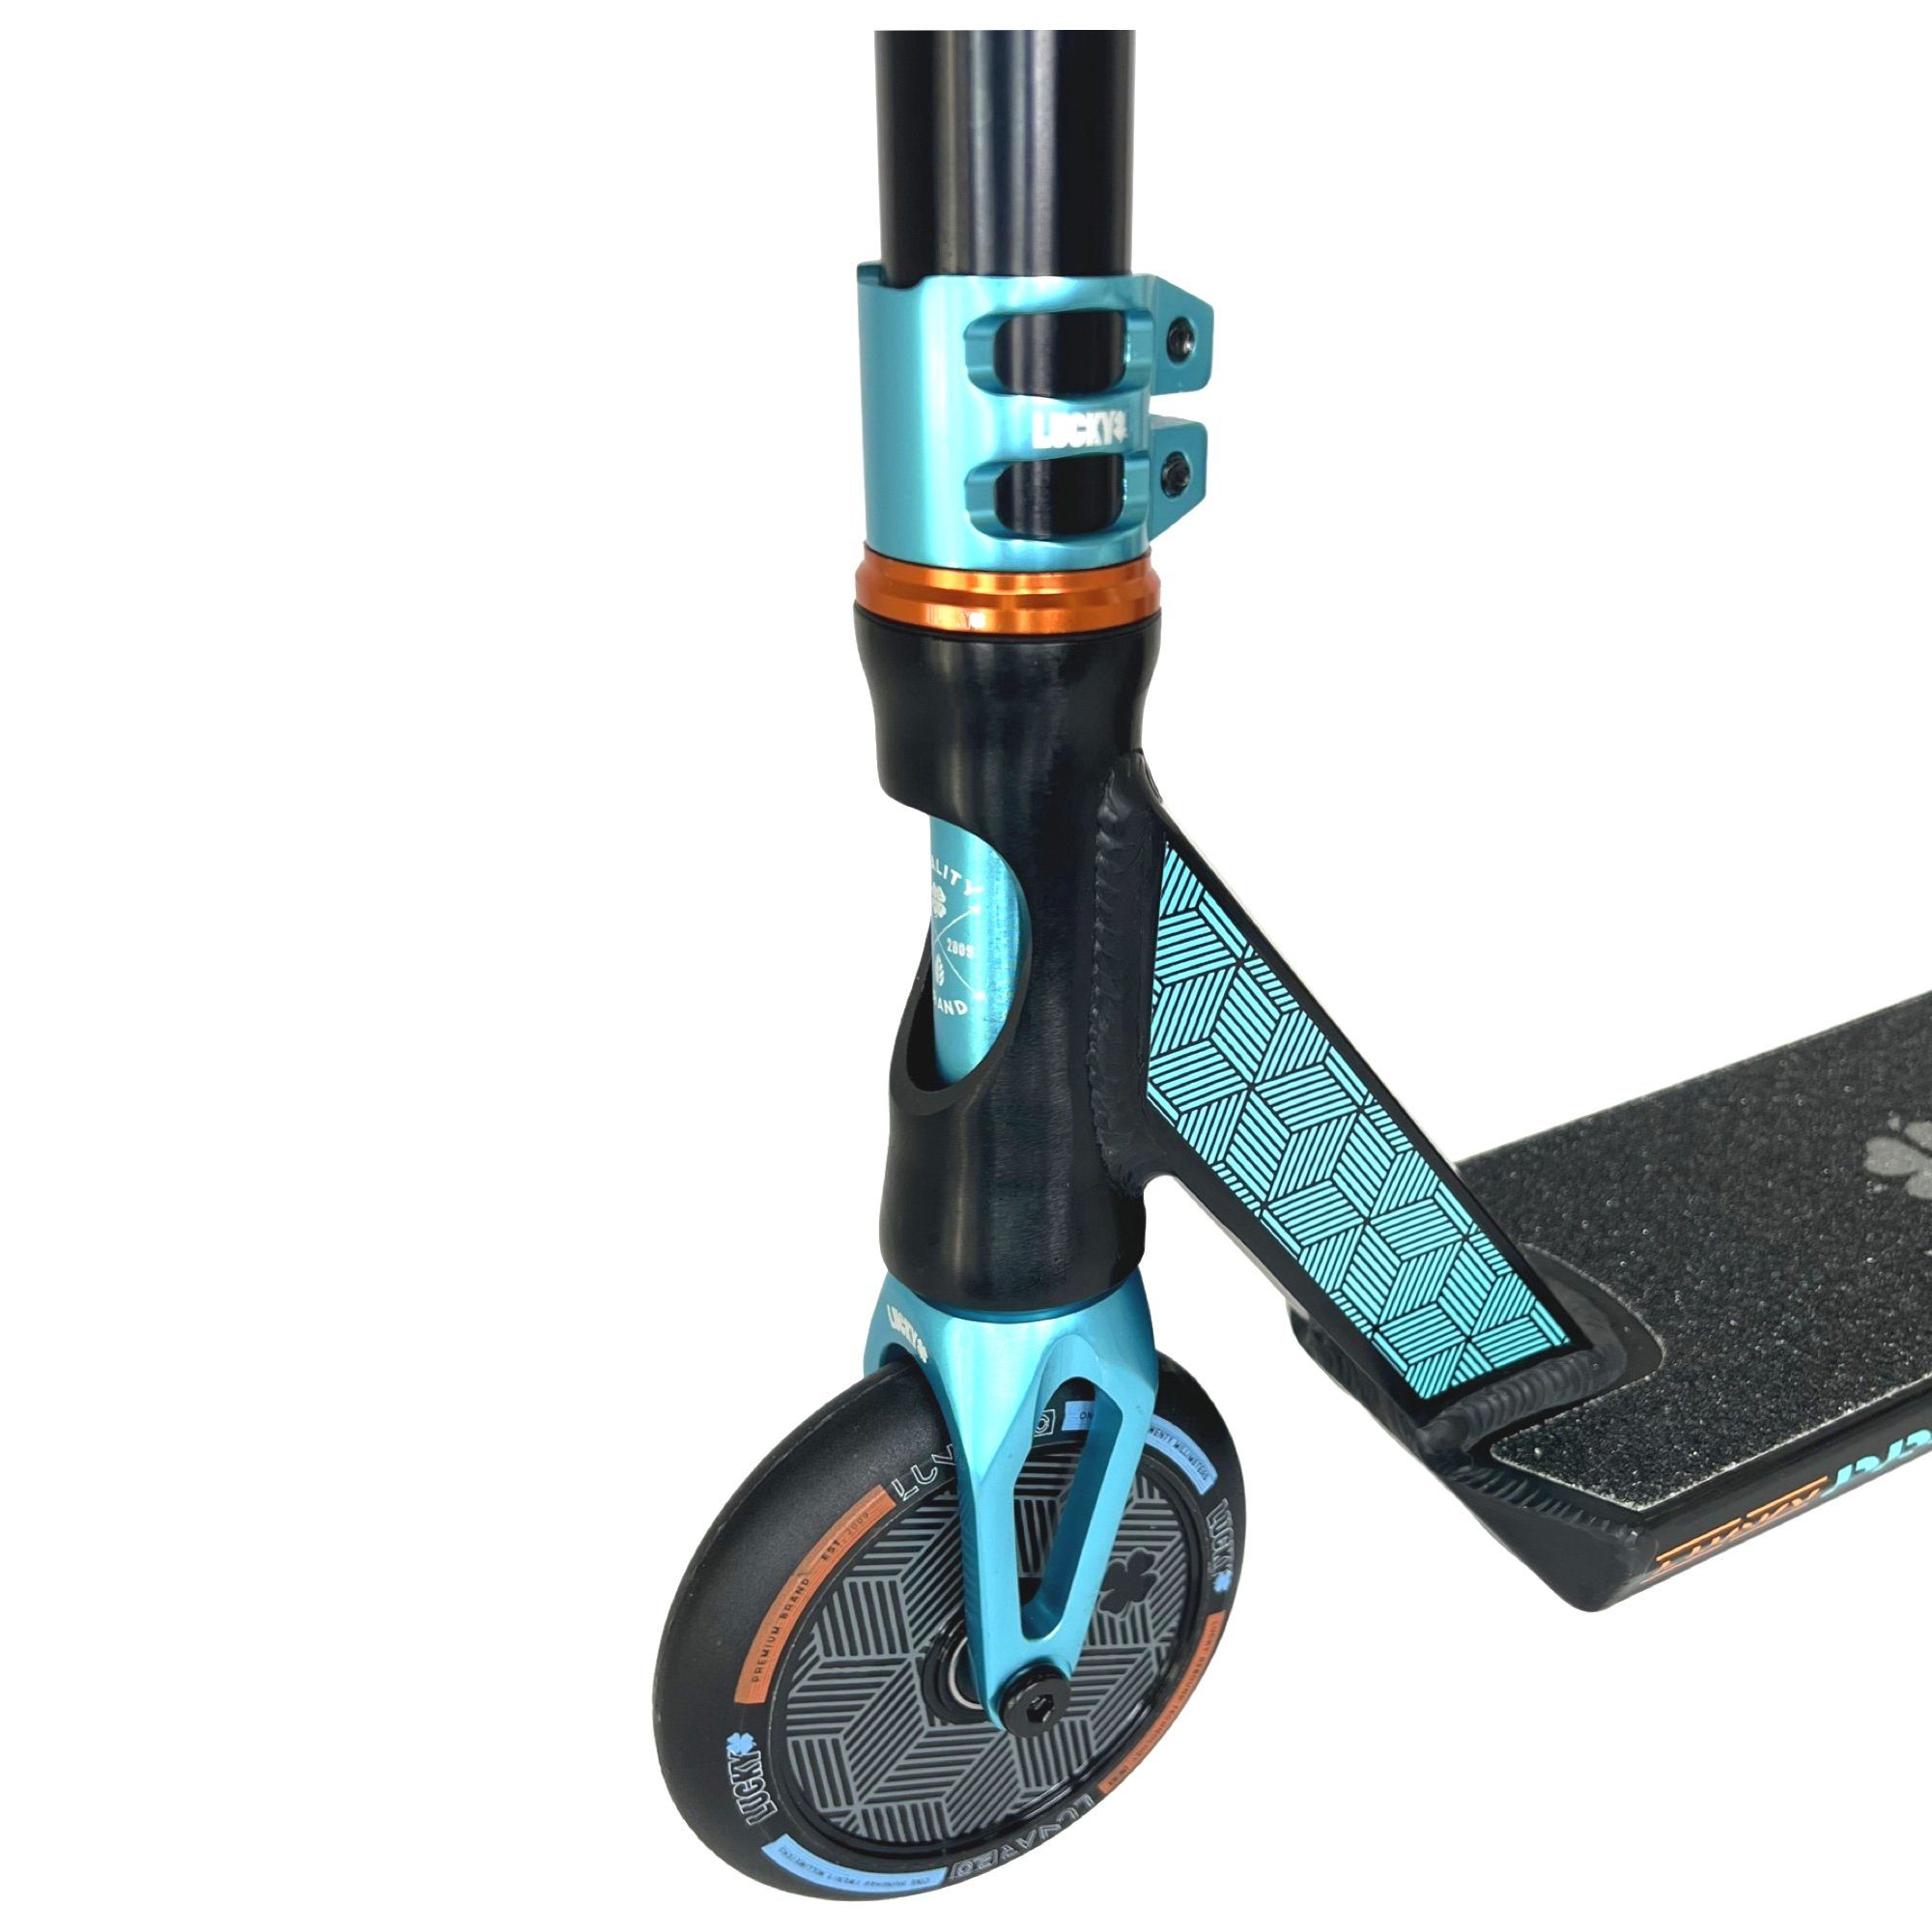 Scooters H=89cm Vegas Lucky Stuntscooter Stunt-Scooter Prospect Lucky Pro 2022